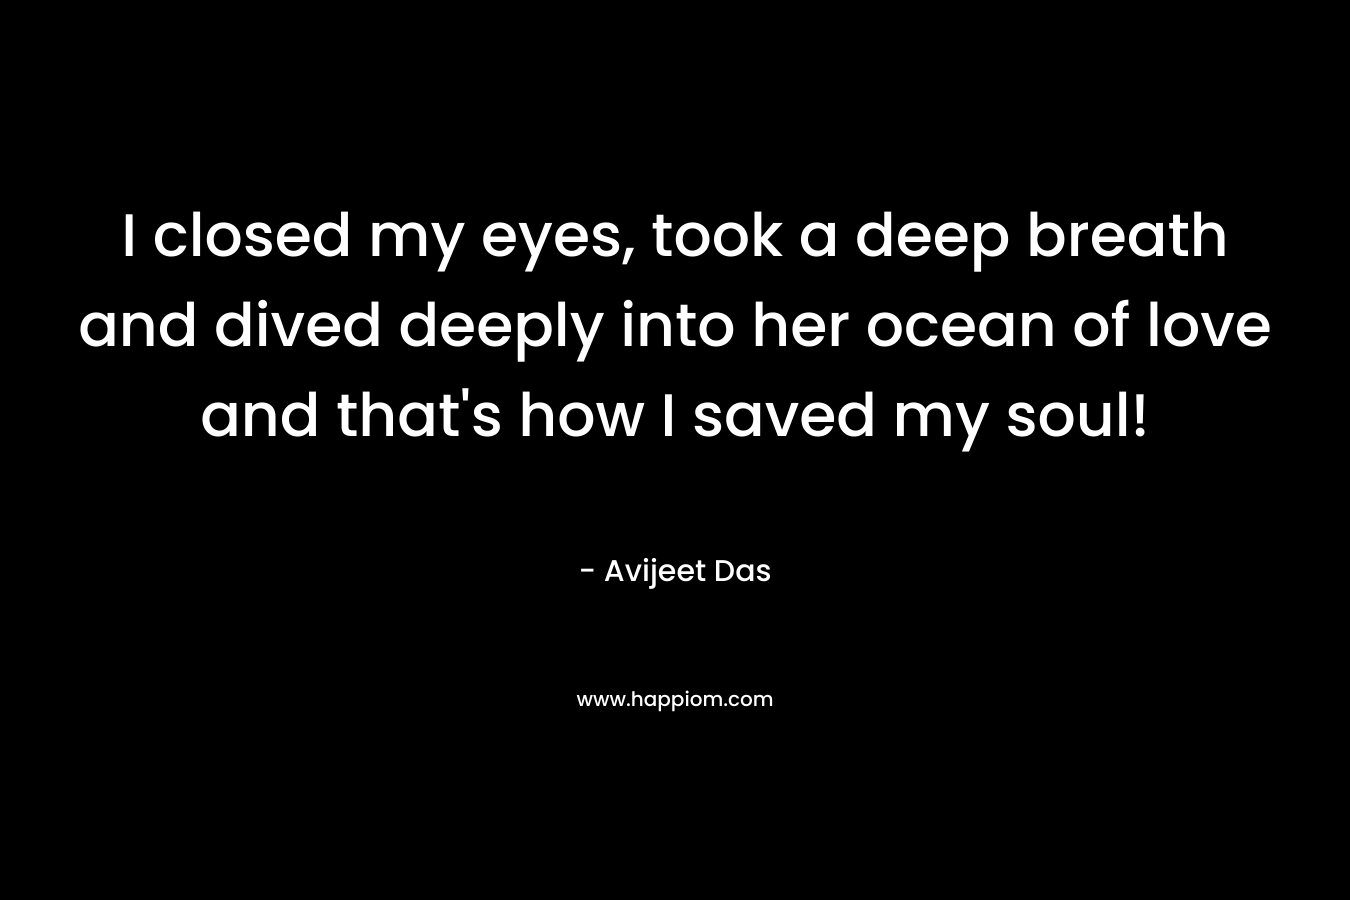 I closed my eyes, took a deep breath and dived deeply into her ocean of love and that's how I saved my soul!